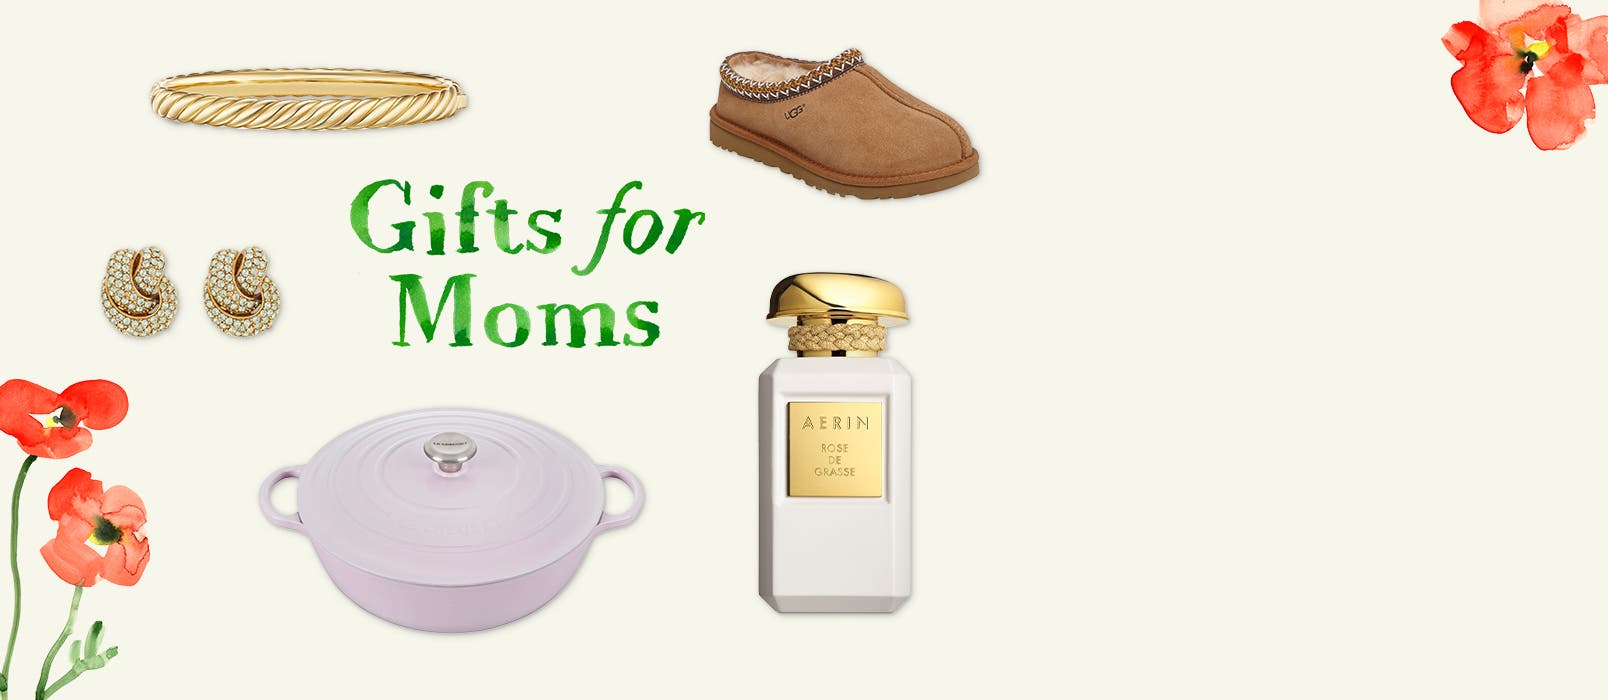 Gifts for moms: a lilac Dutch oven, knotted earrings, a bracelet, UGG slipper and perfume bottle.